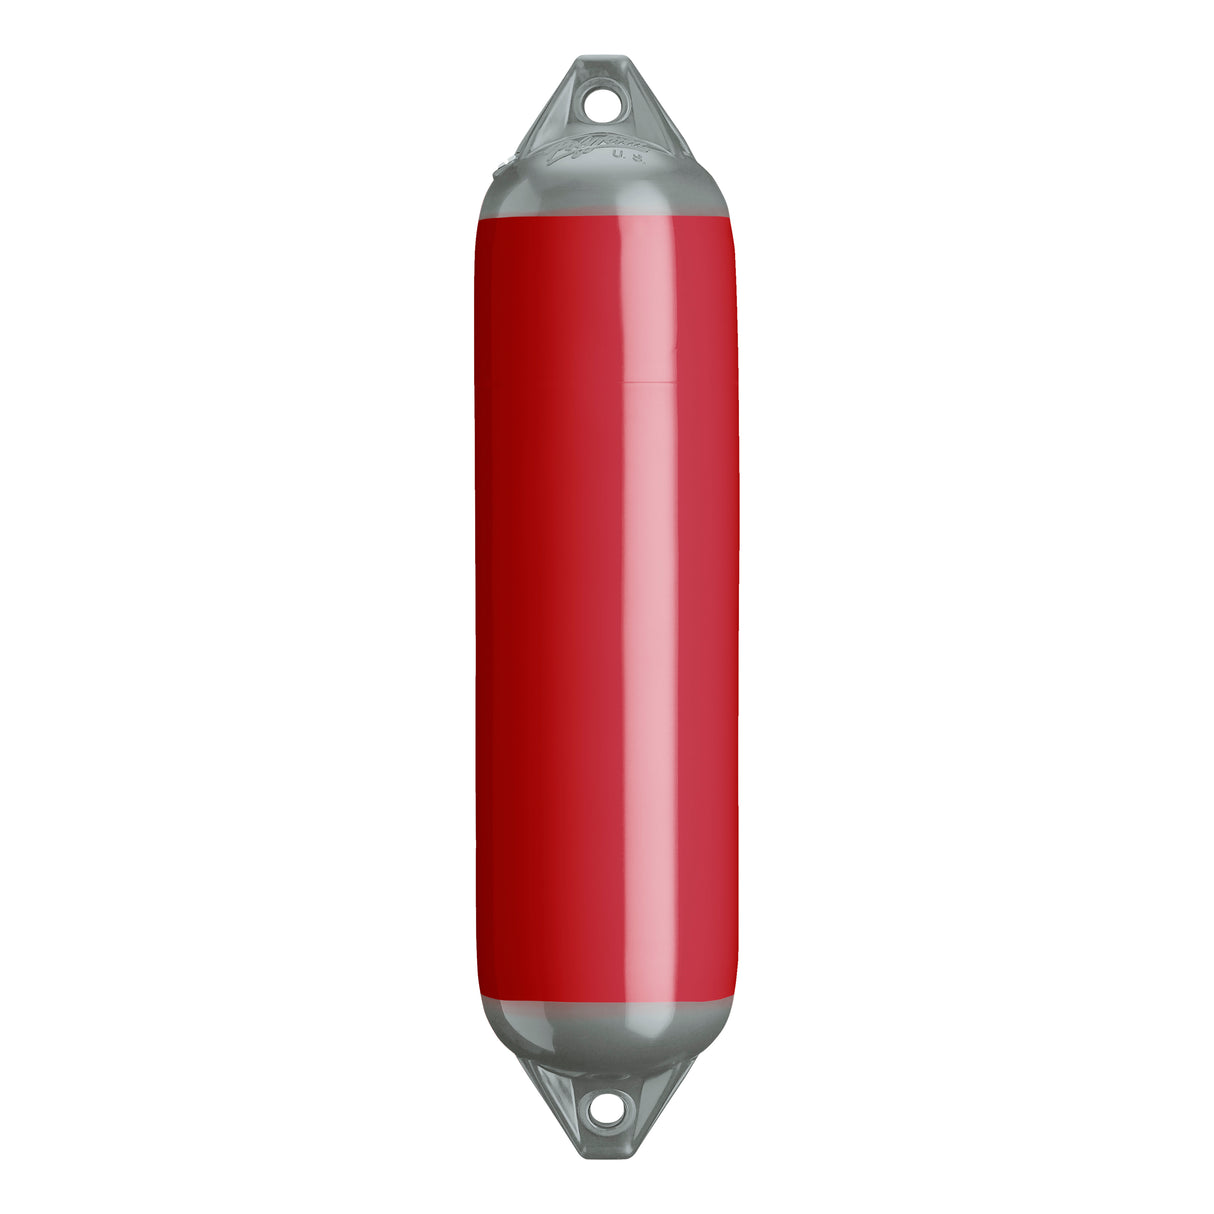 Classic Red boat fender with Grey-Top, Polyform F-1